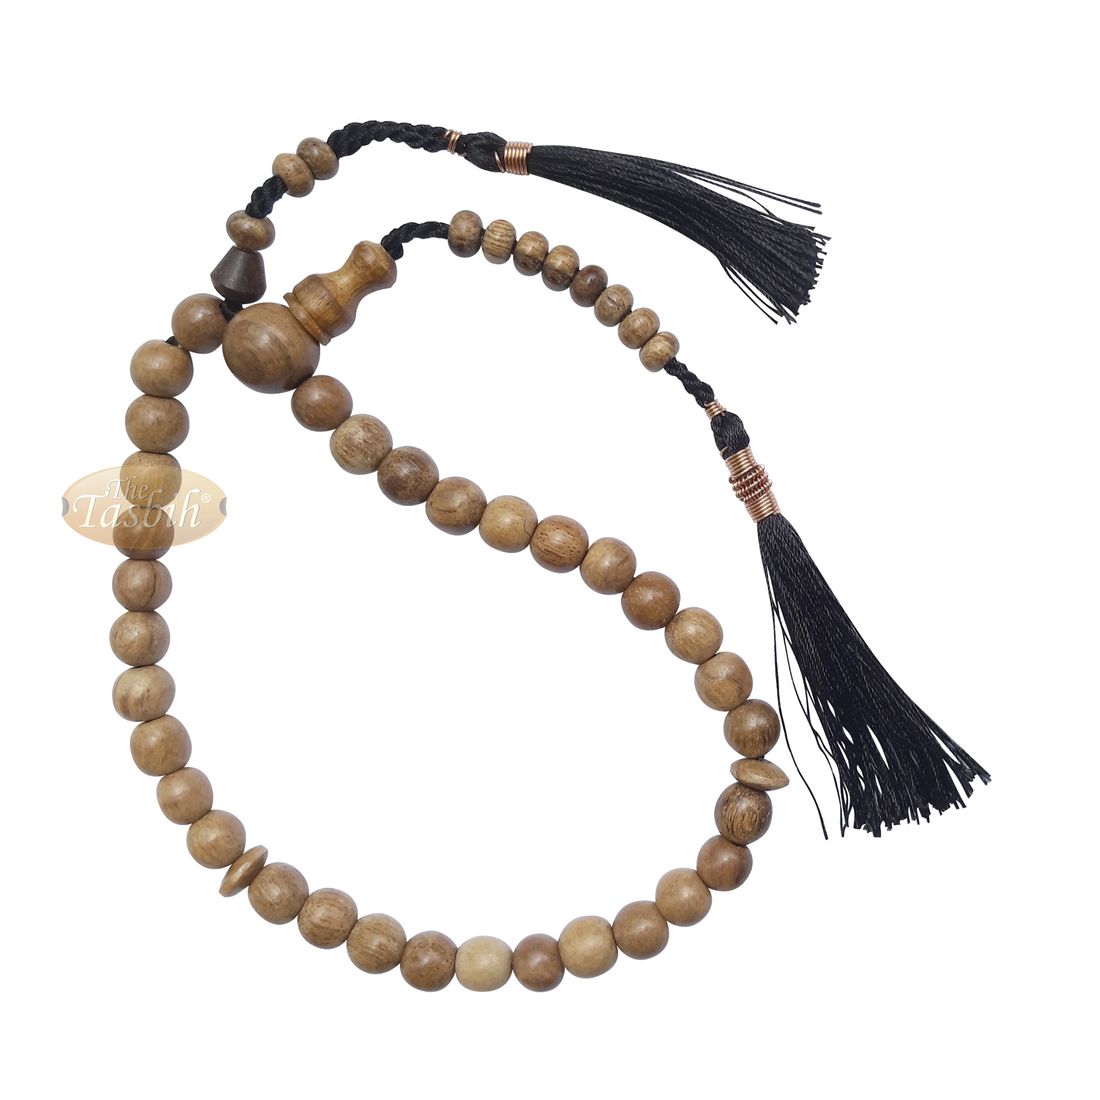 Small Natural Light Brown Oud Aloeswood Agarwood 33-Bead Prayer Beads Rosary 8mm Beads with 2 Black Copper-decorated Tassel